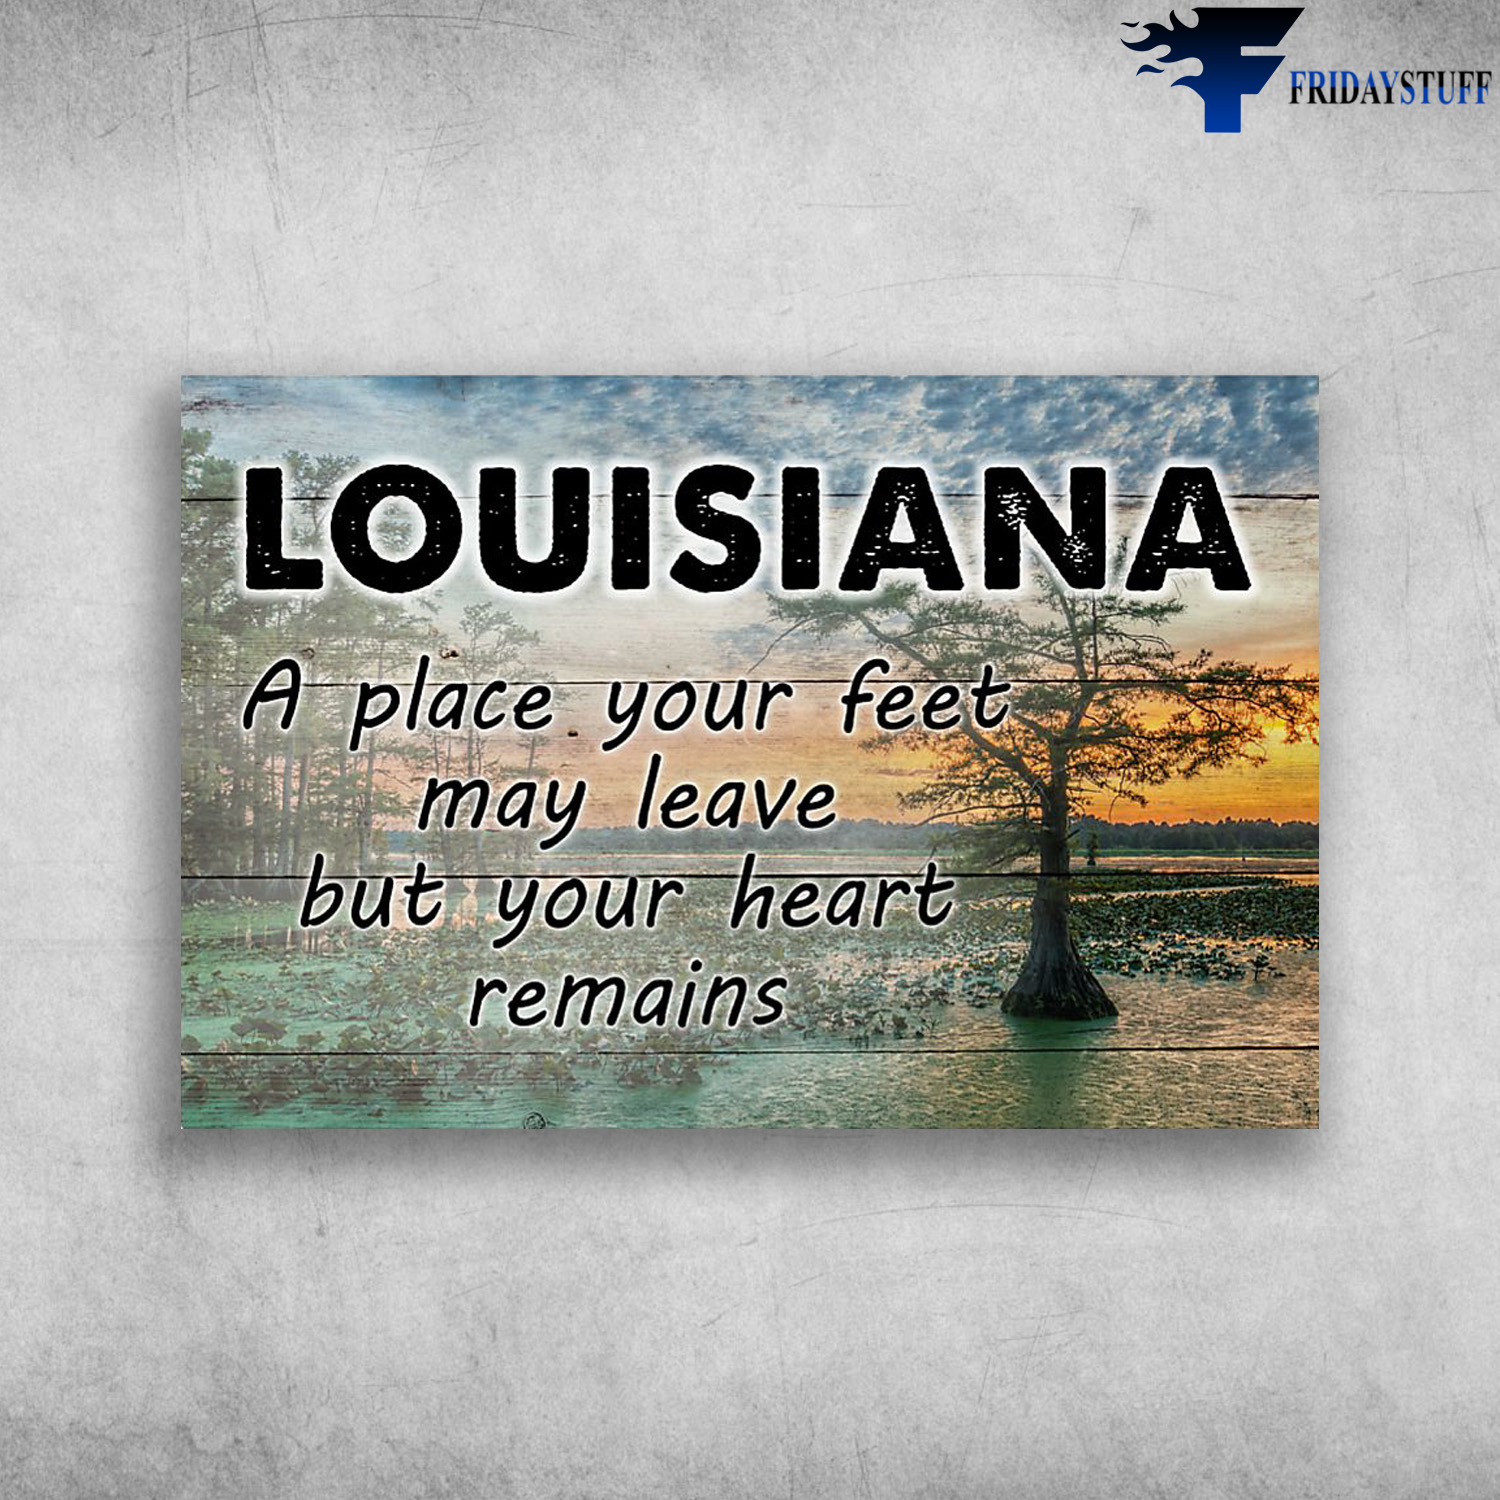 Louisiana - A Place Your Feet May Leave, But Your Heart Remains